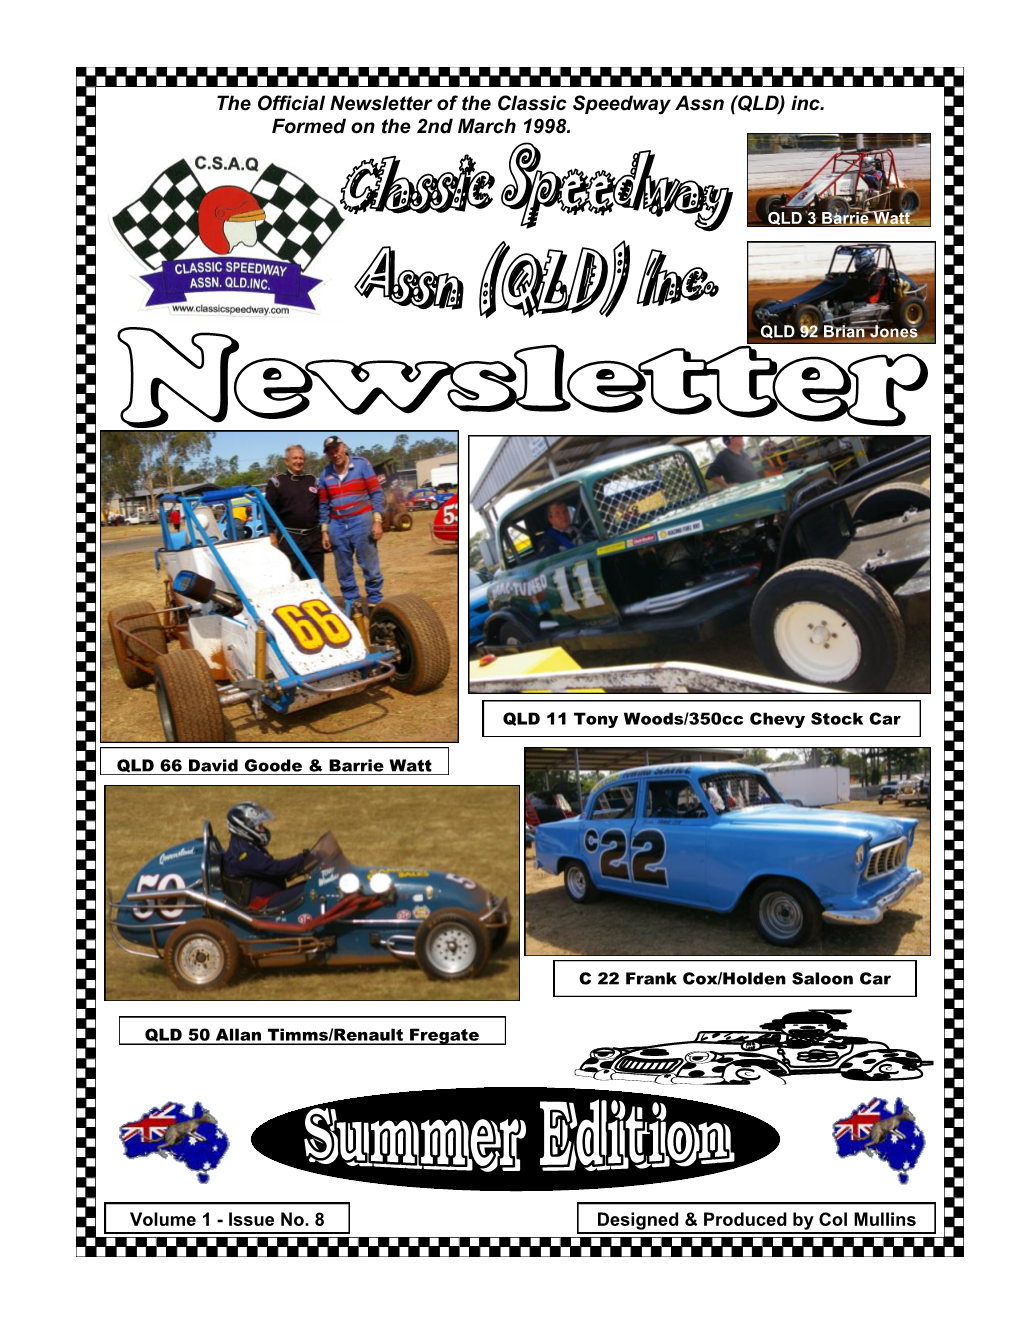 The Official Newsletter of the Classic Speedway Assn (QLD) Inc. Formed on the 2Nd March 1998